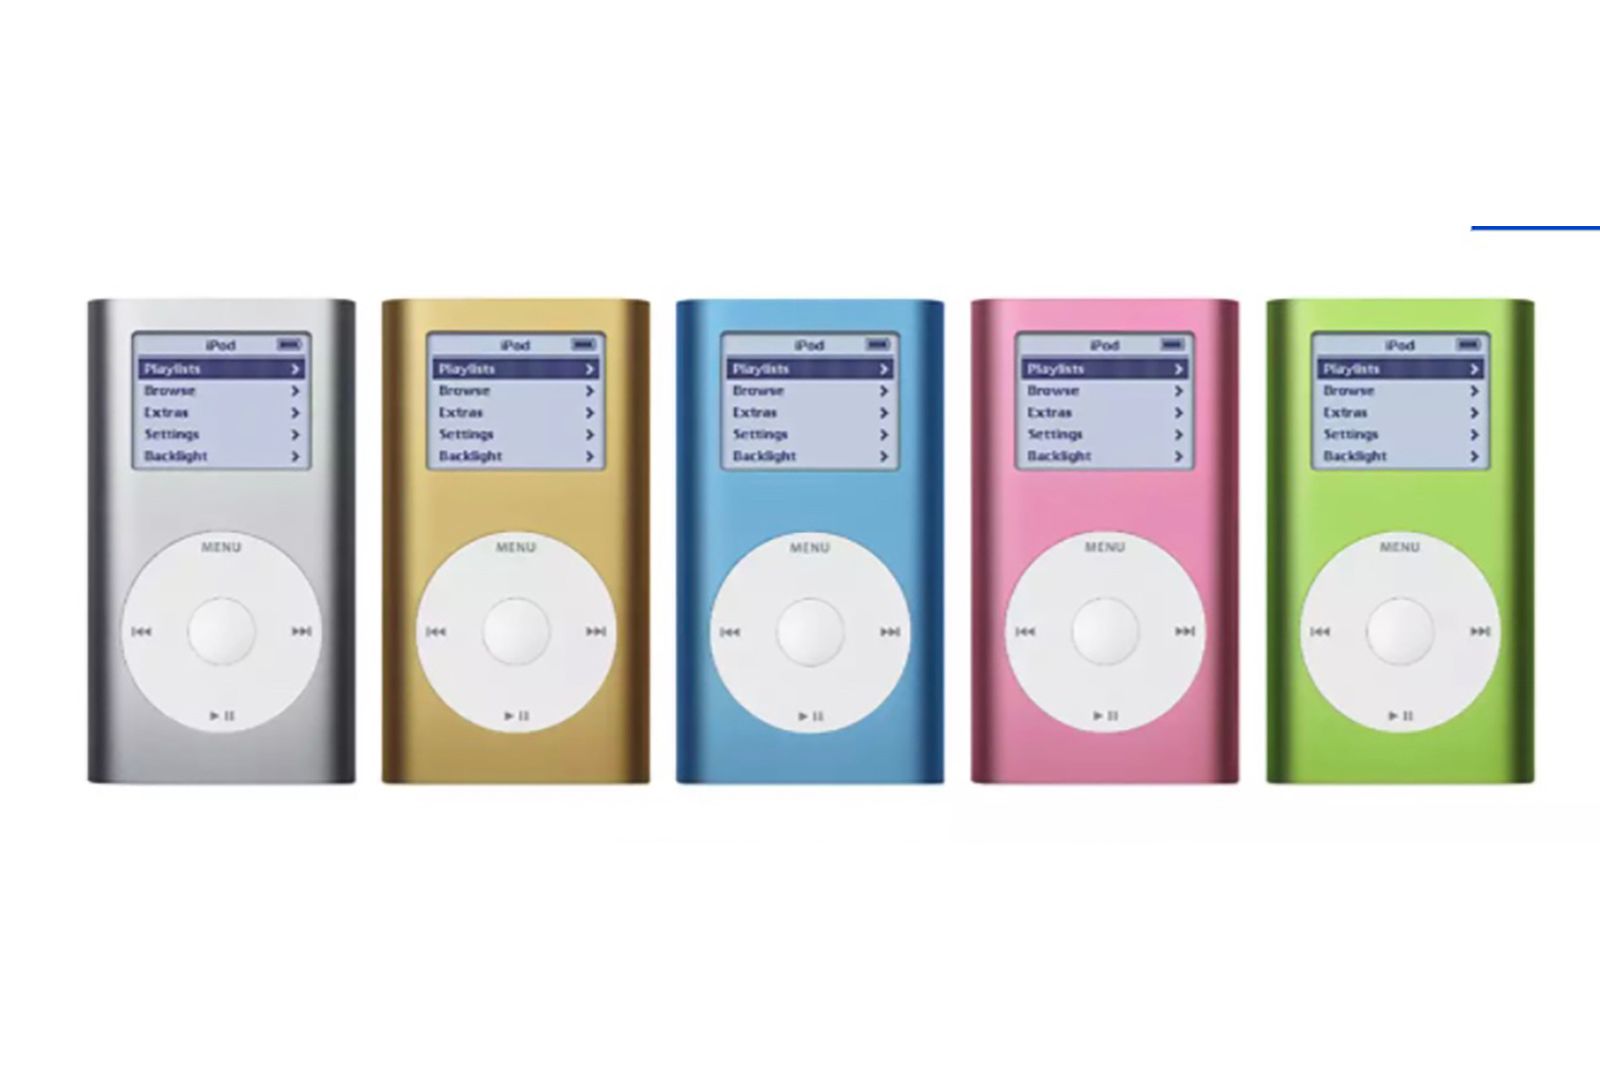 Every Apple iPod Model over the years (2001 to 2022) photo 4